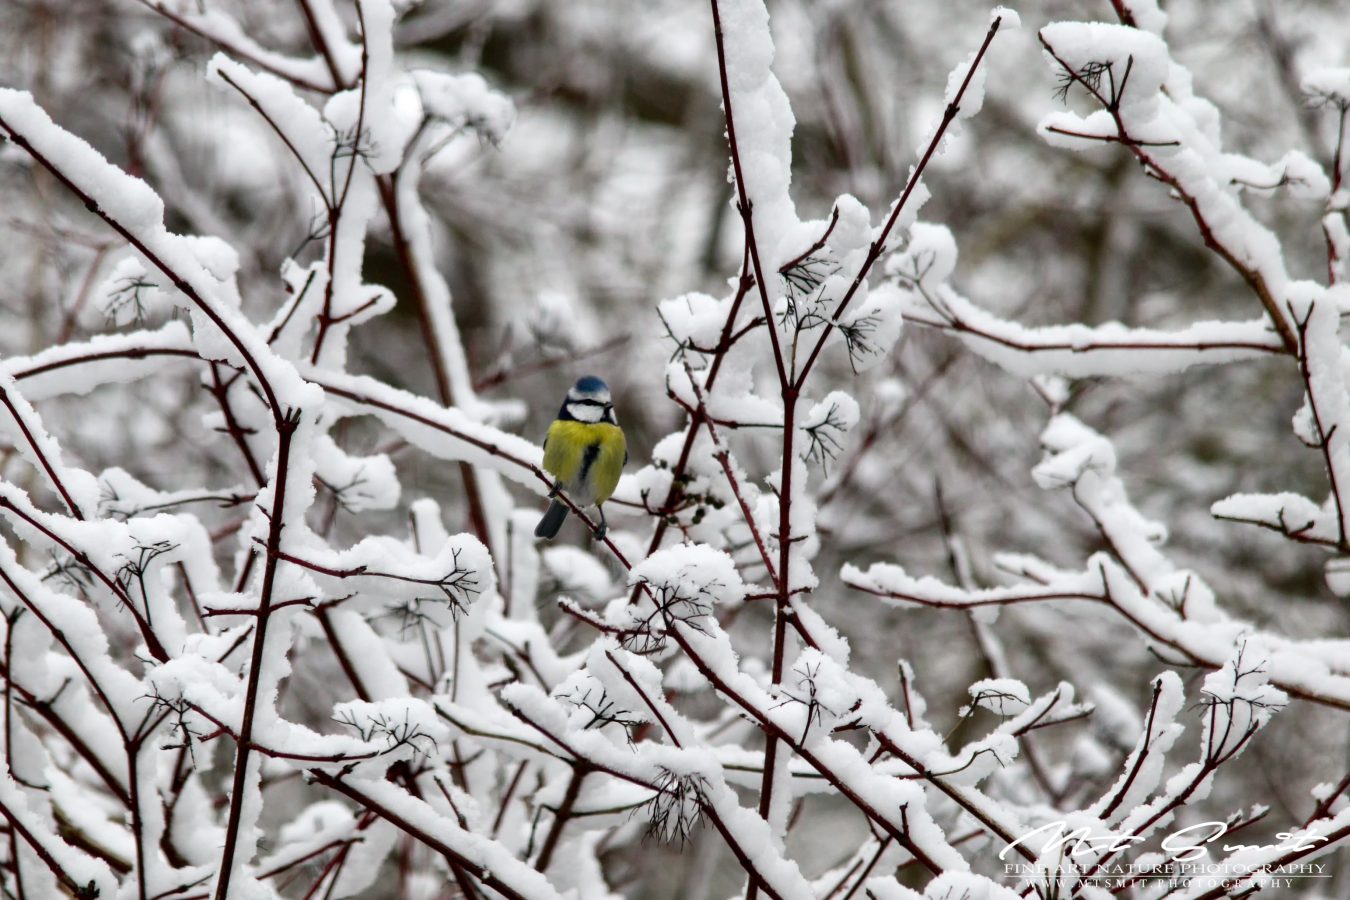 BLUE TIT IN THE SNOW